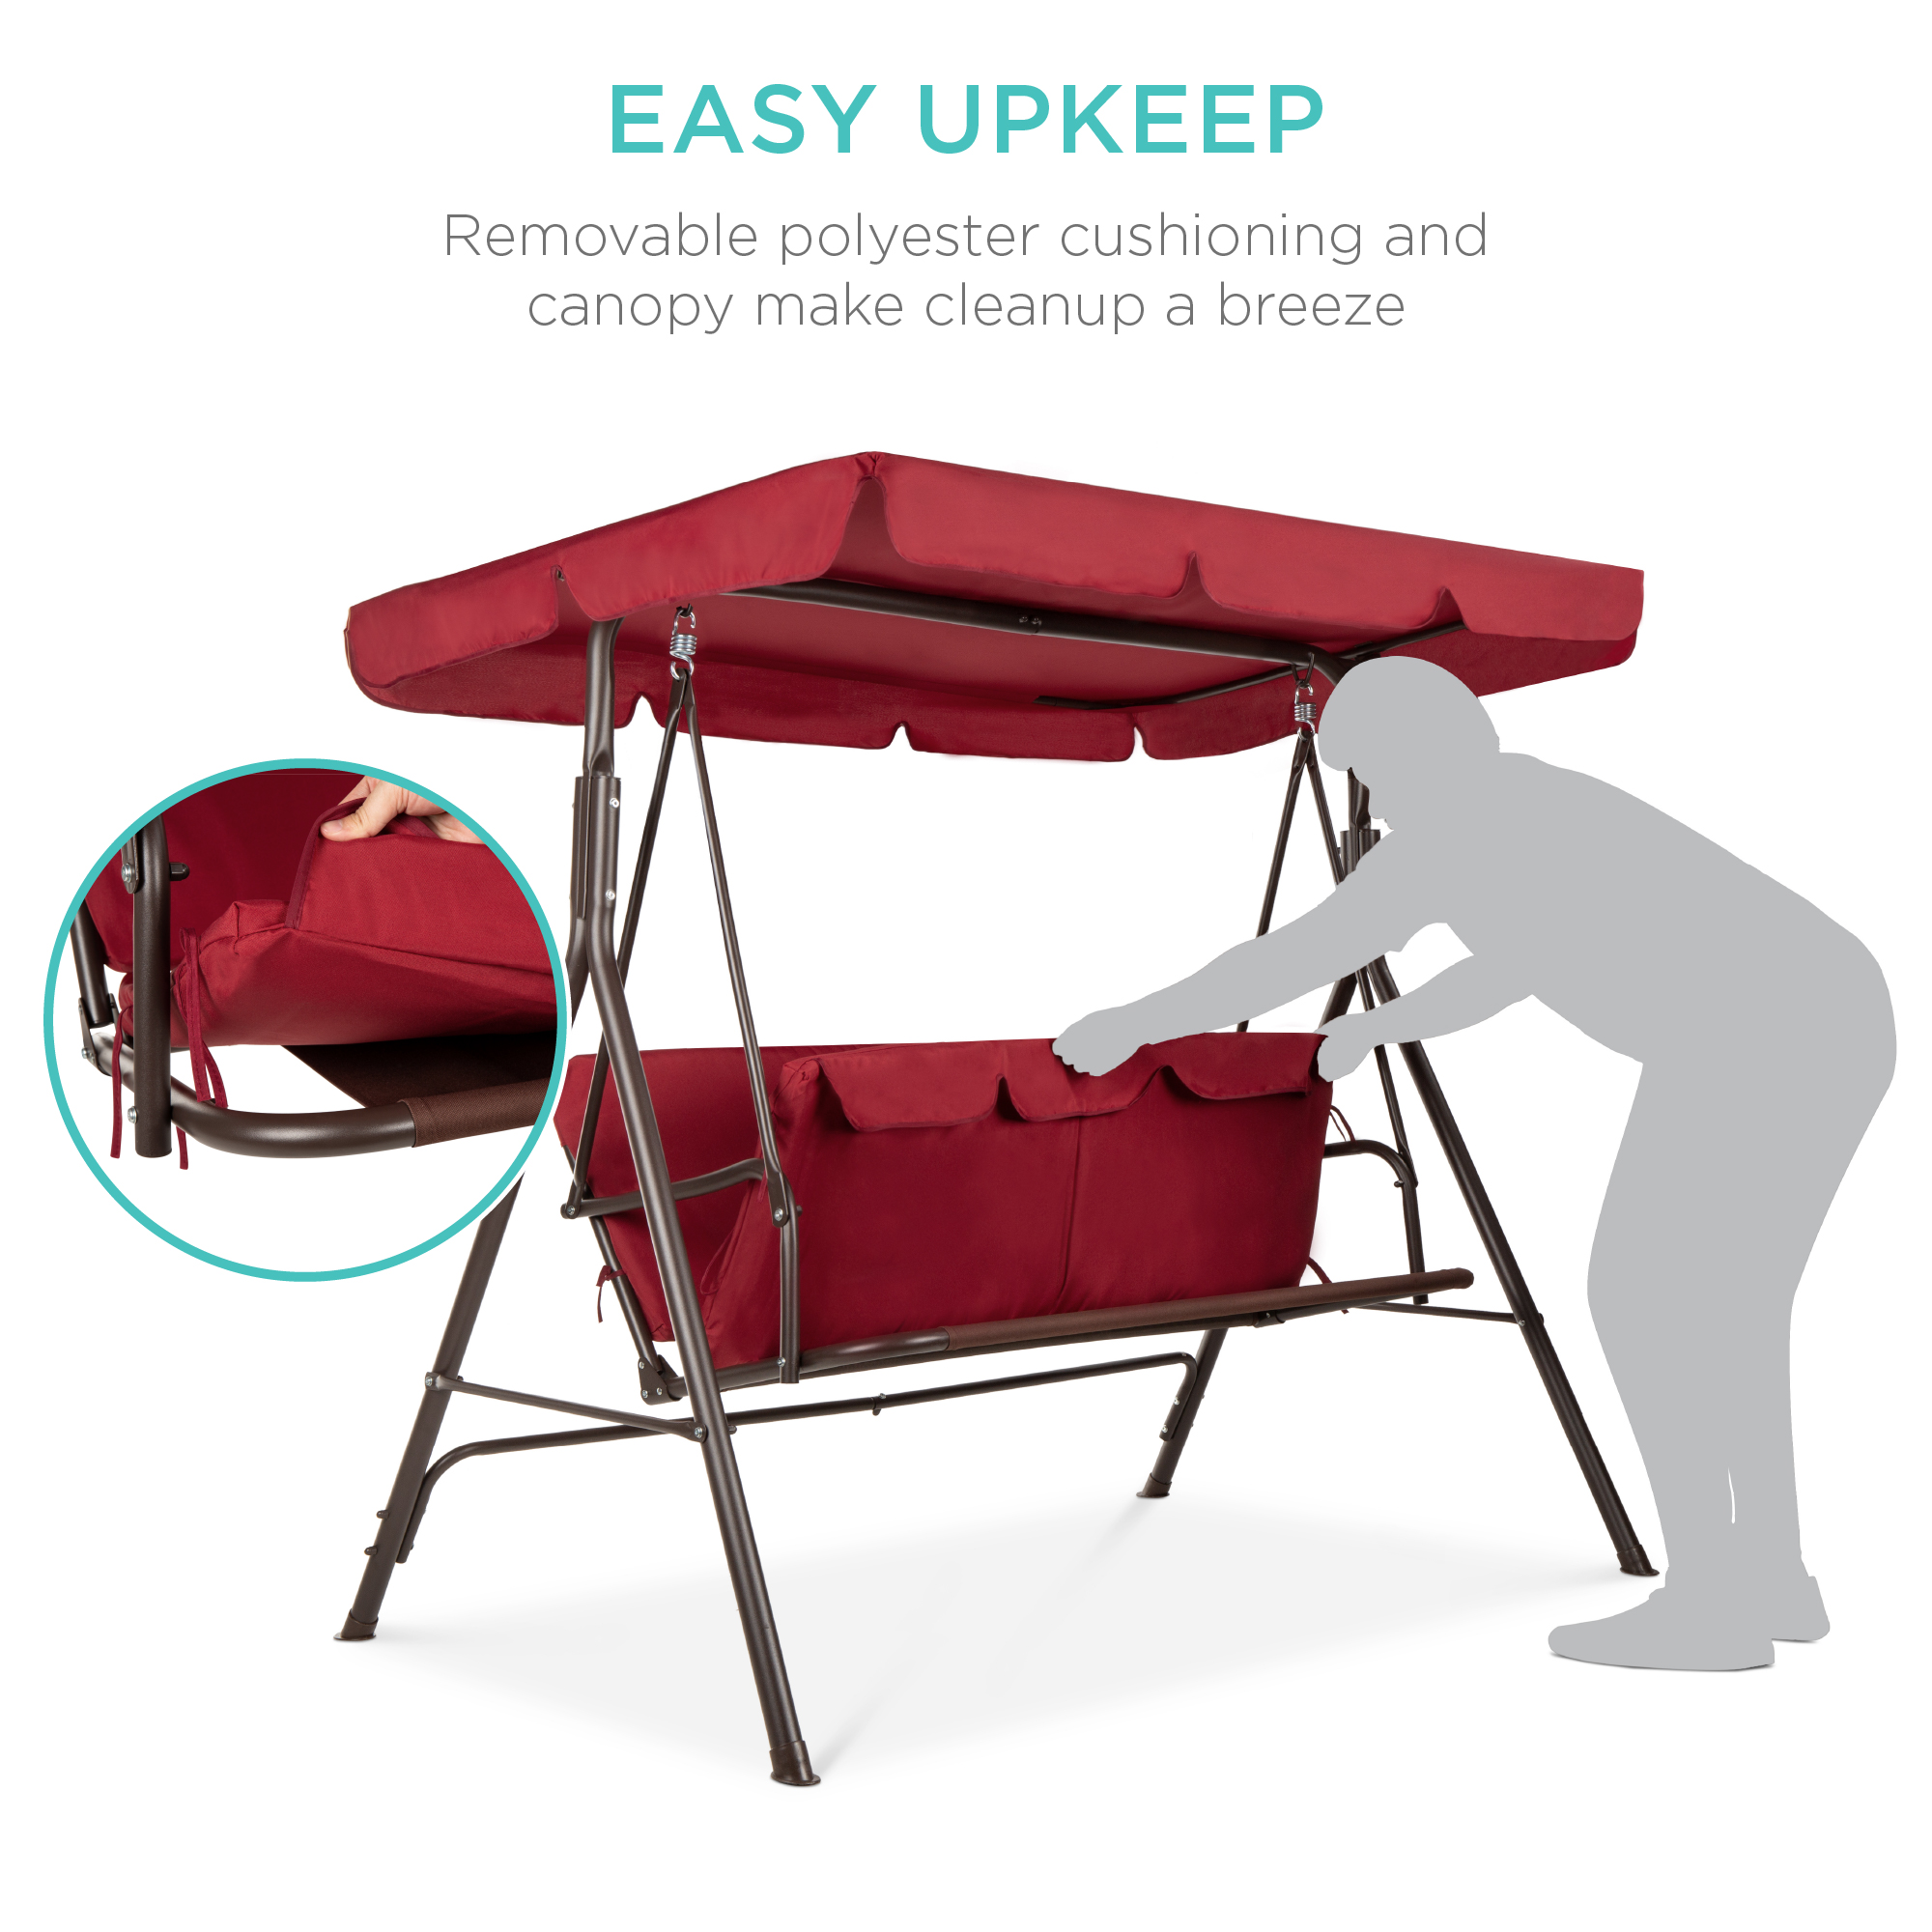 Best Choice Products 2-Person Outdoor Convertible Canopy Swing Glider Lounge Chair w/ Removable Cushions - Burgundy - image 5 of 7